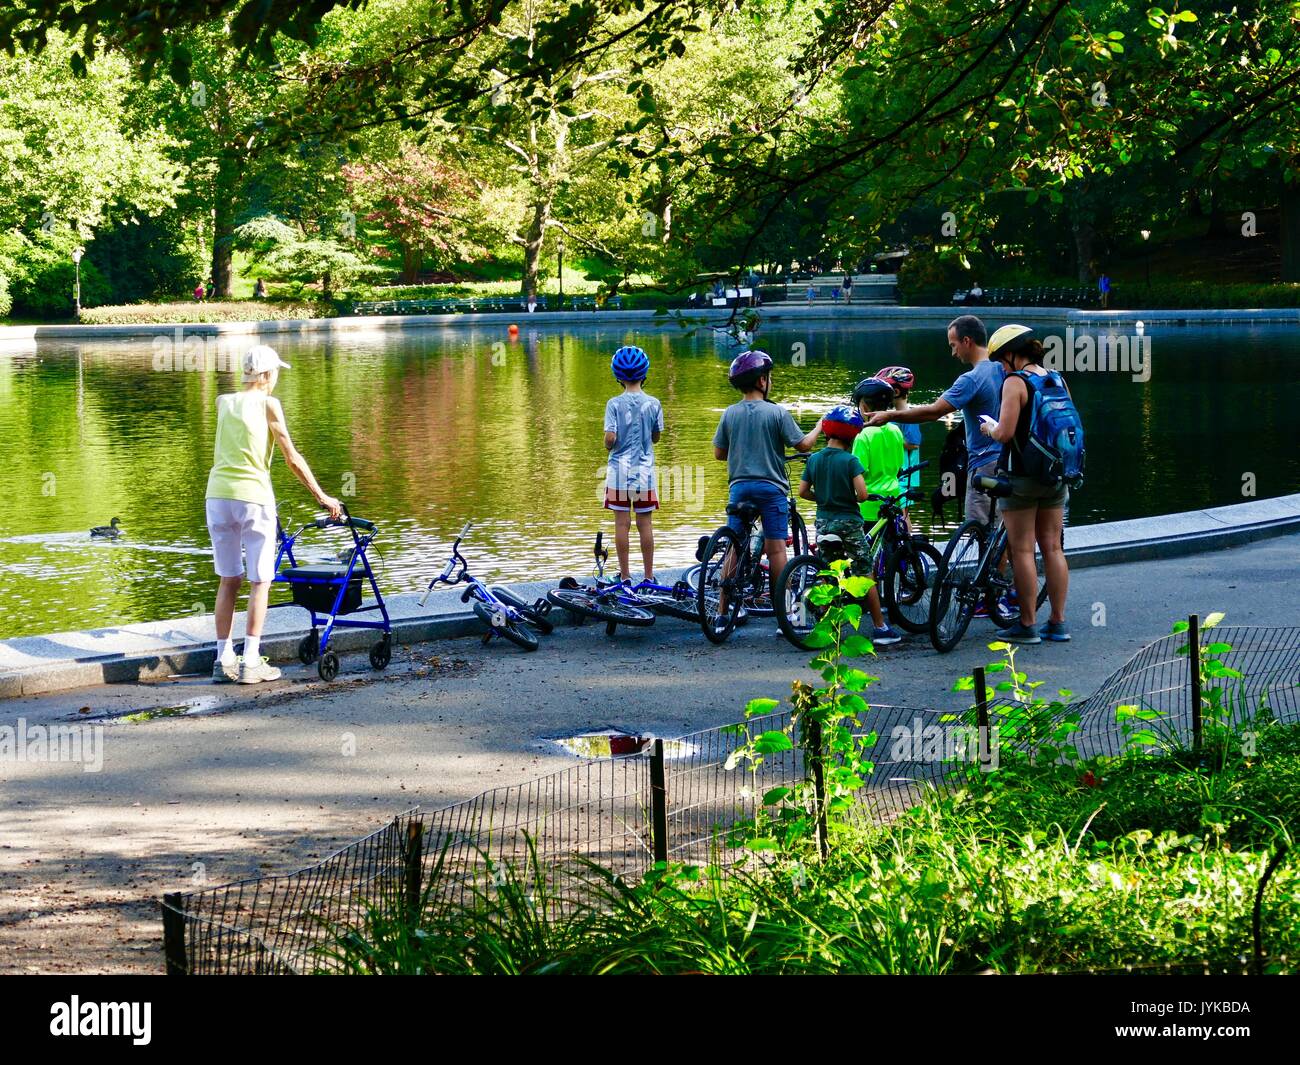 Elderly woman with walker observes family with bicycles - mother, father, five boys - stopped next to a pond in Central Park, New York, NY, USA. Stock Photo